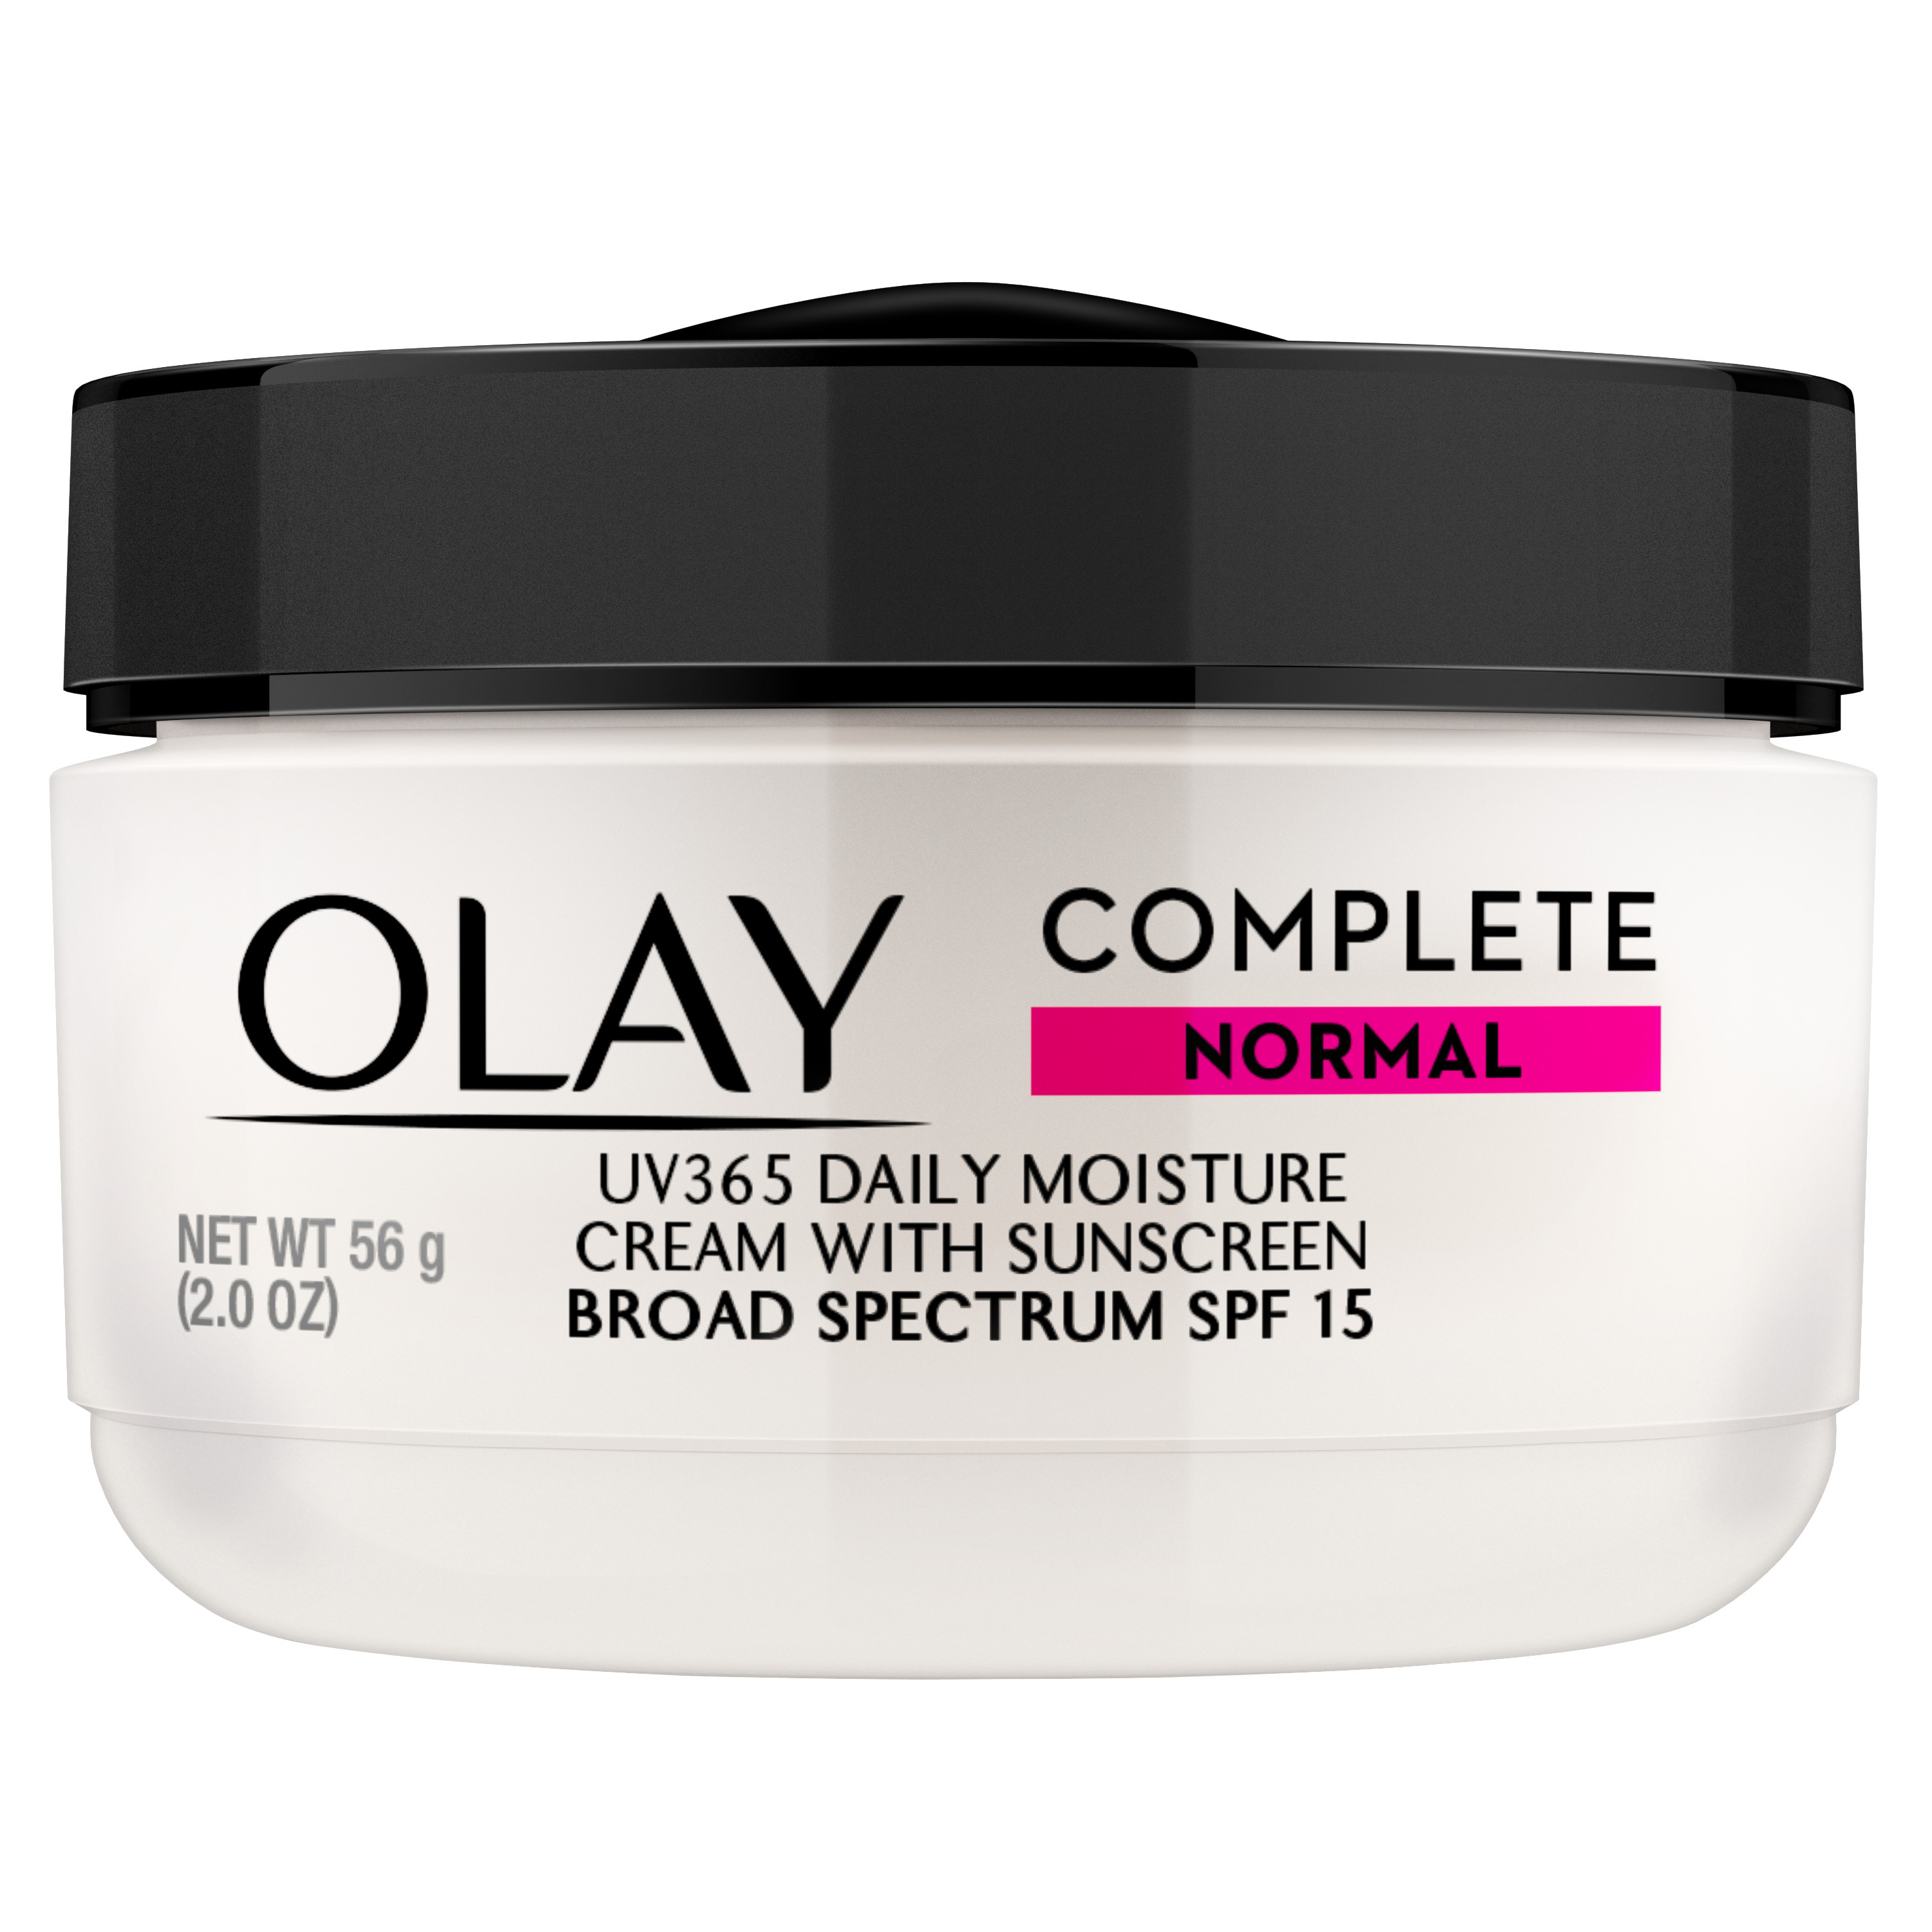 Olay Complete Cream Moisturizer with SPF 15 Normal, 2.0 oz - image 3 of 8